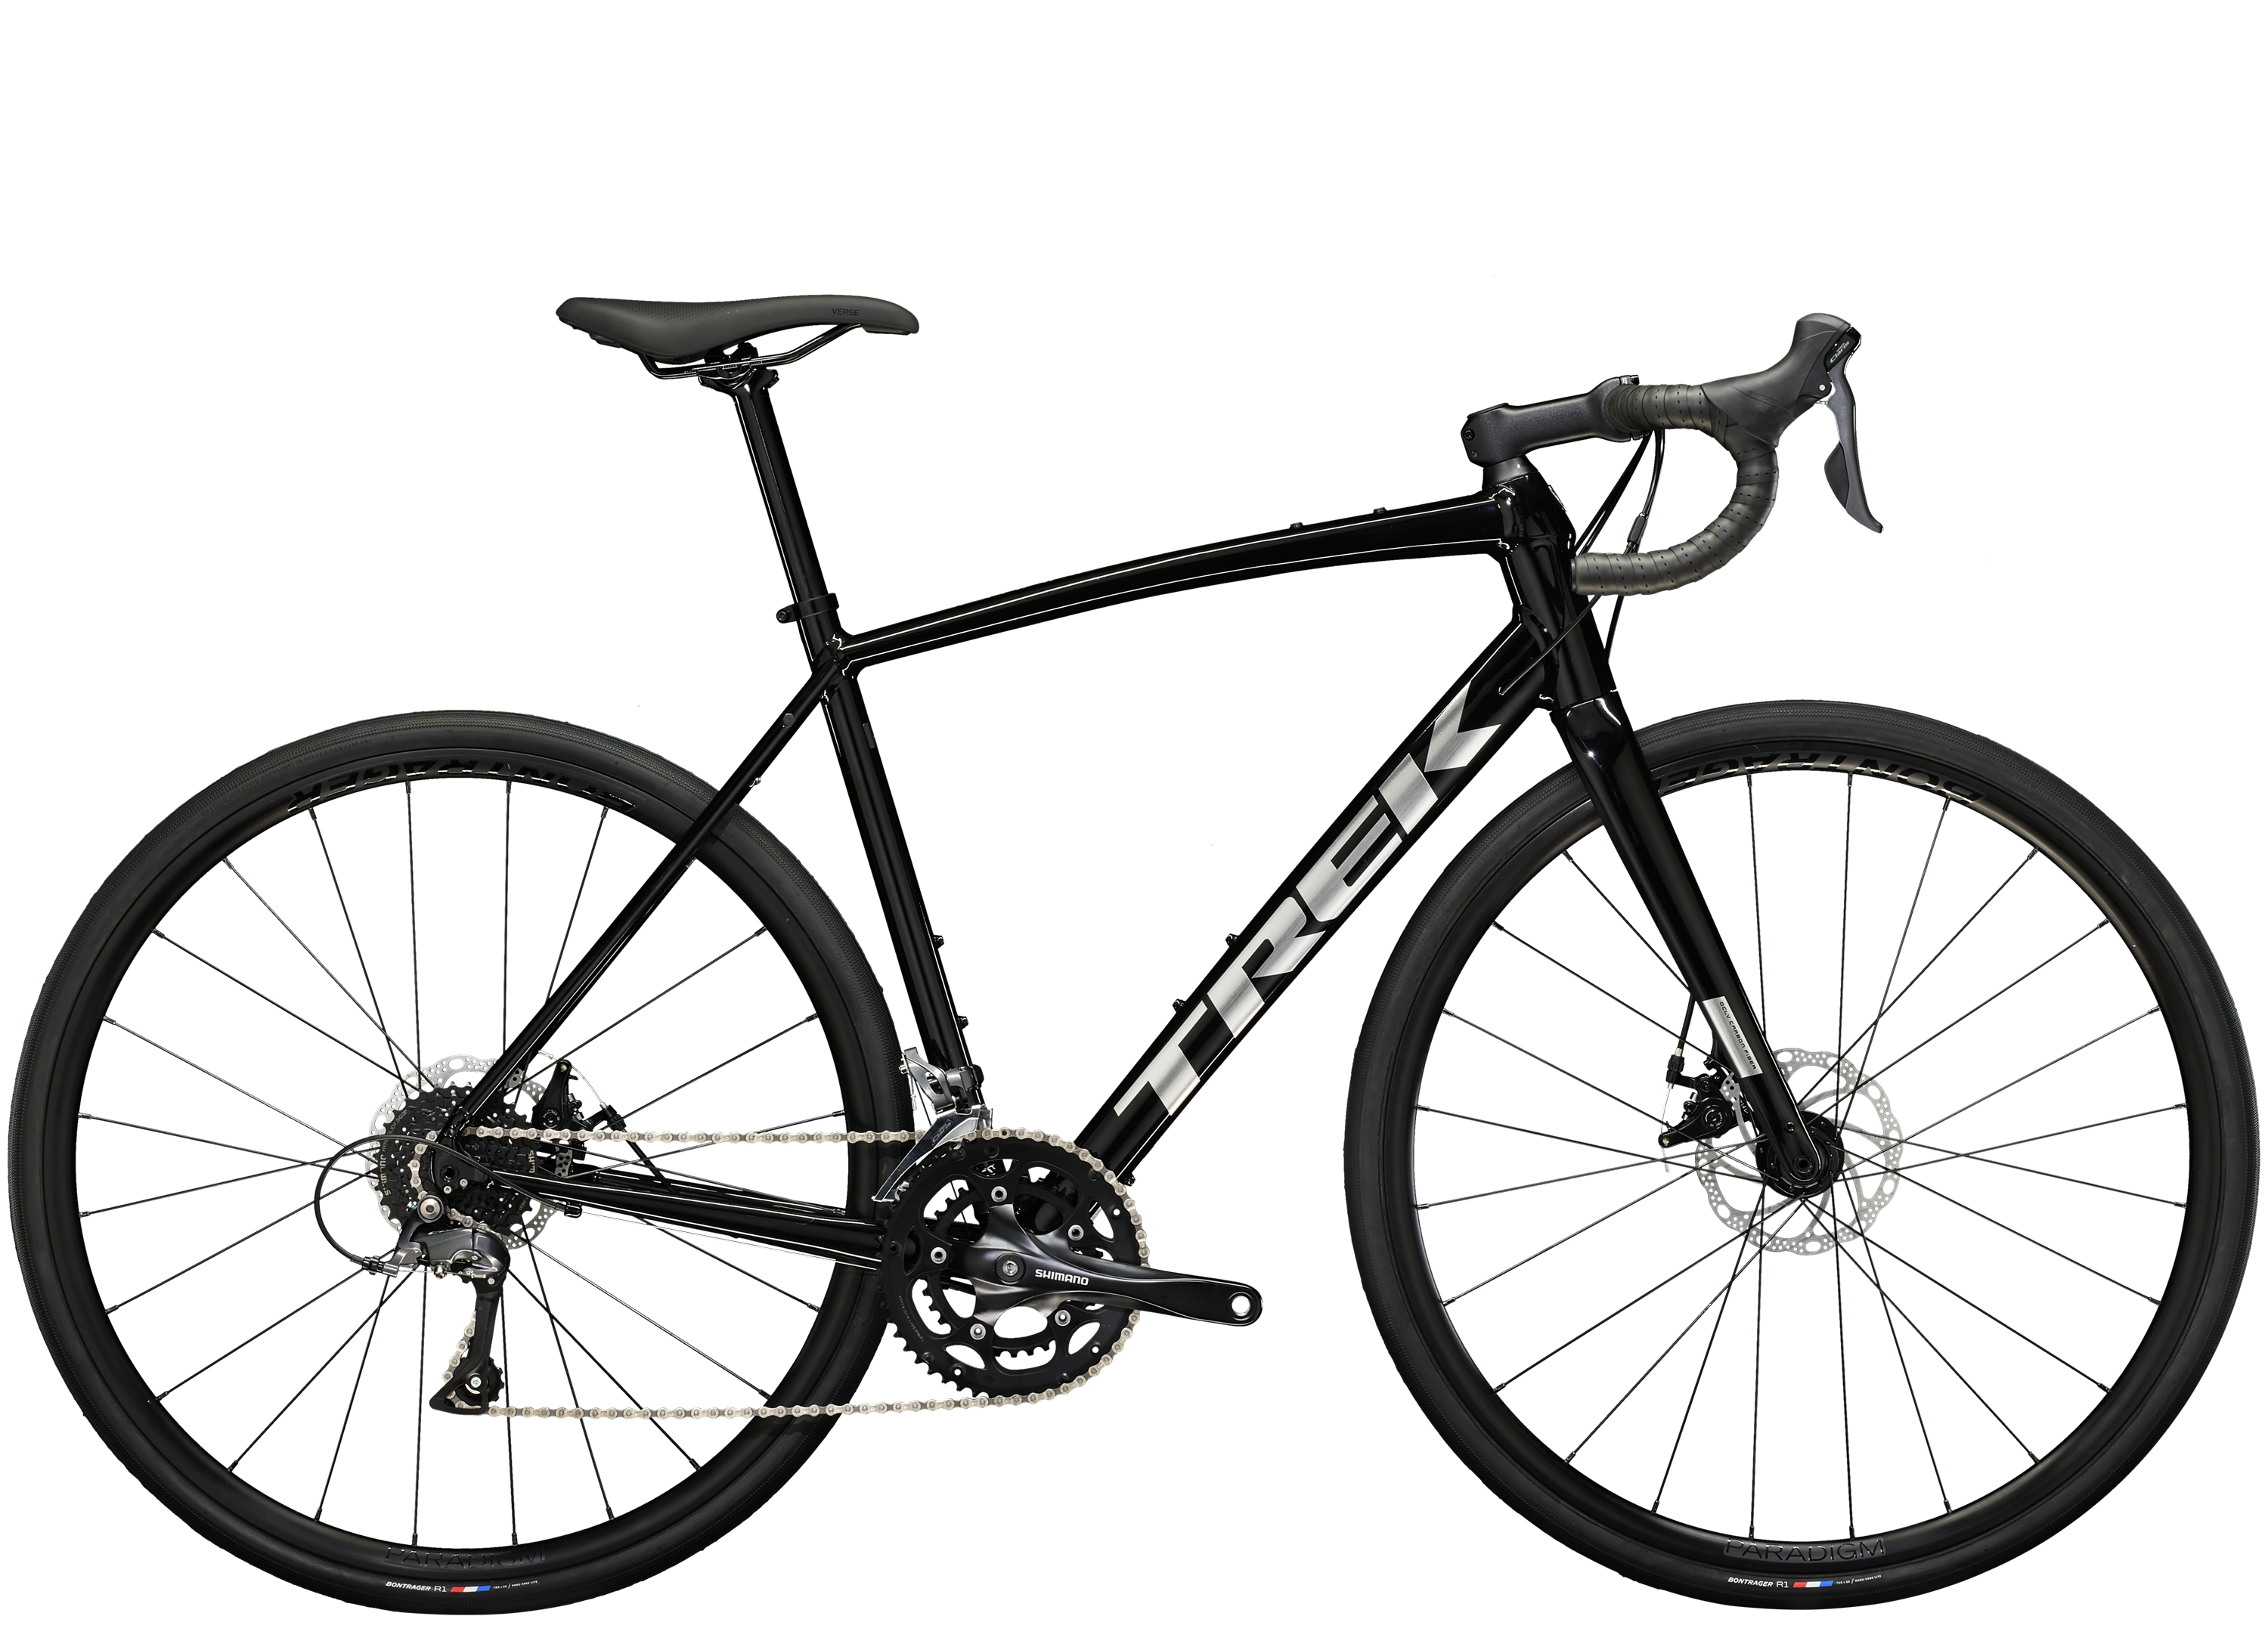 <a href="https://cycles-clement.be/product/domane-al-2-56-trek-black/">DOMANE AL 2 56 TREK BLACK</a>